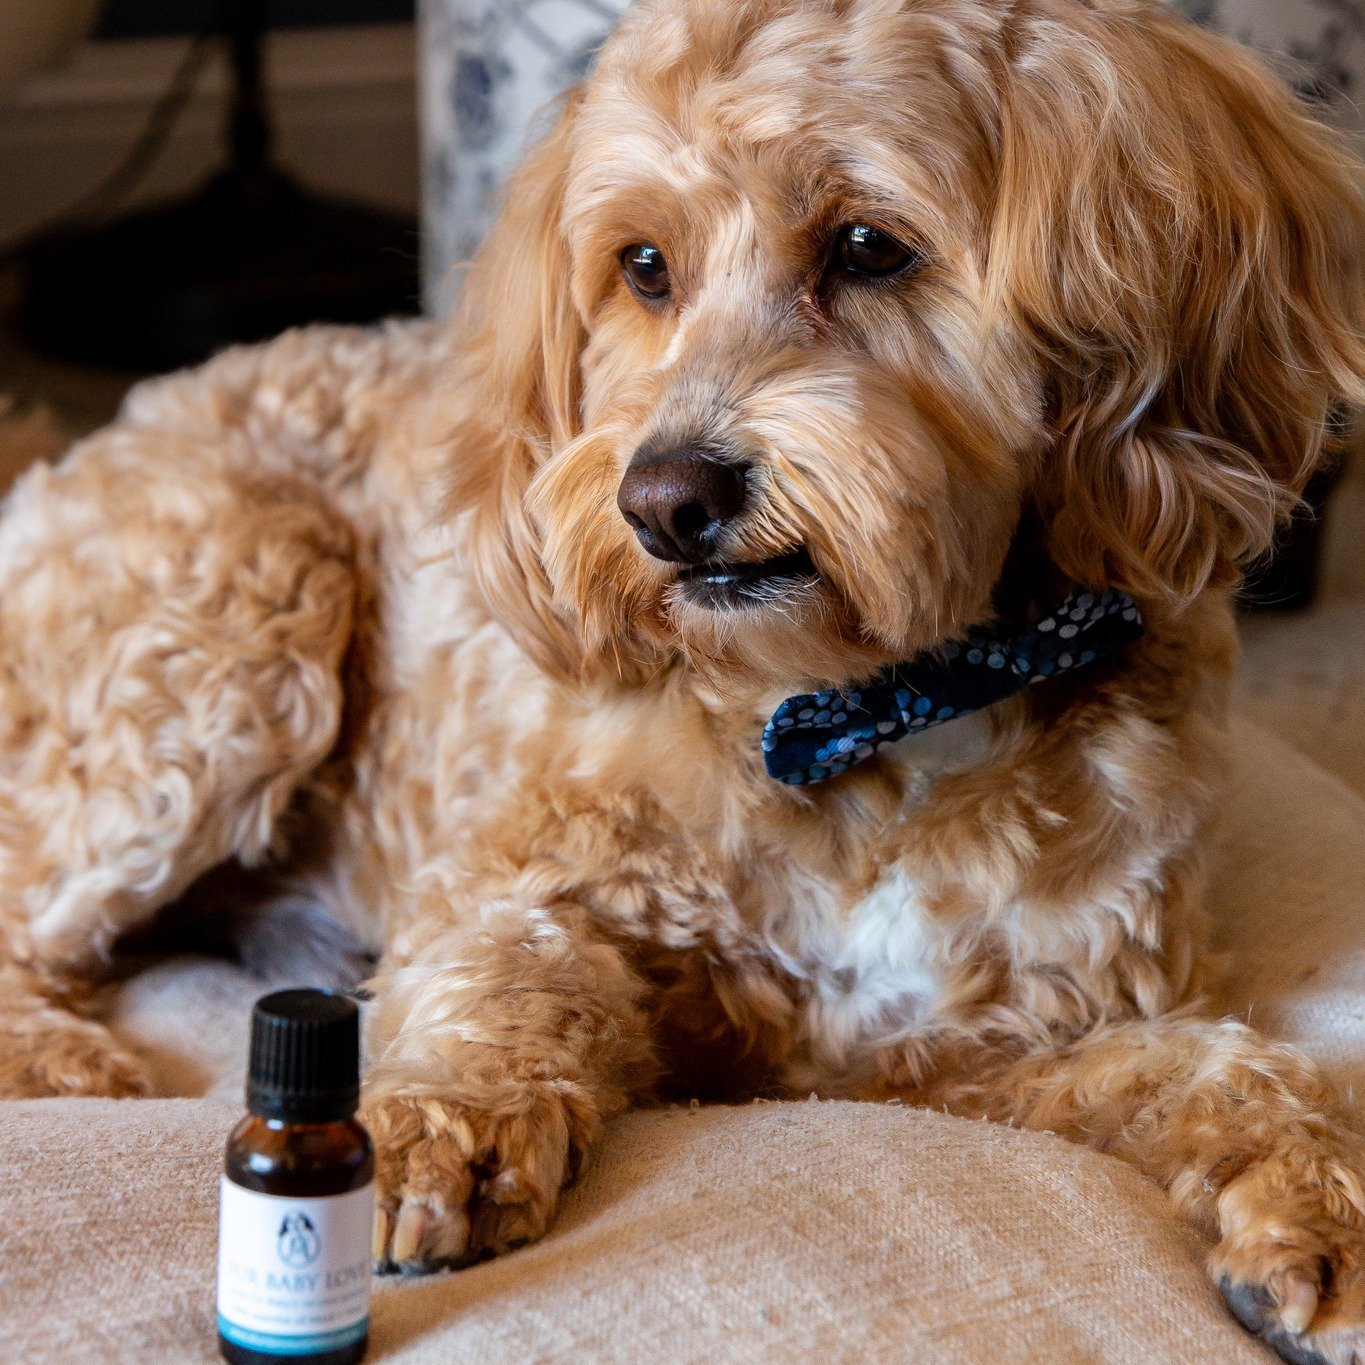 Fur Baby Love seems to be a hit not just with the fur babies, but also with their human companions! The blend's safety for pets and calming properties make it a favourite among pet owners. Additionally, the calming effects of chamomile, lavender, and